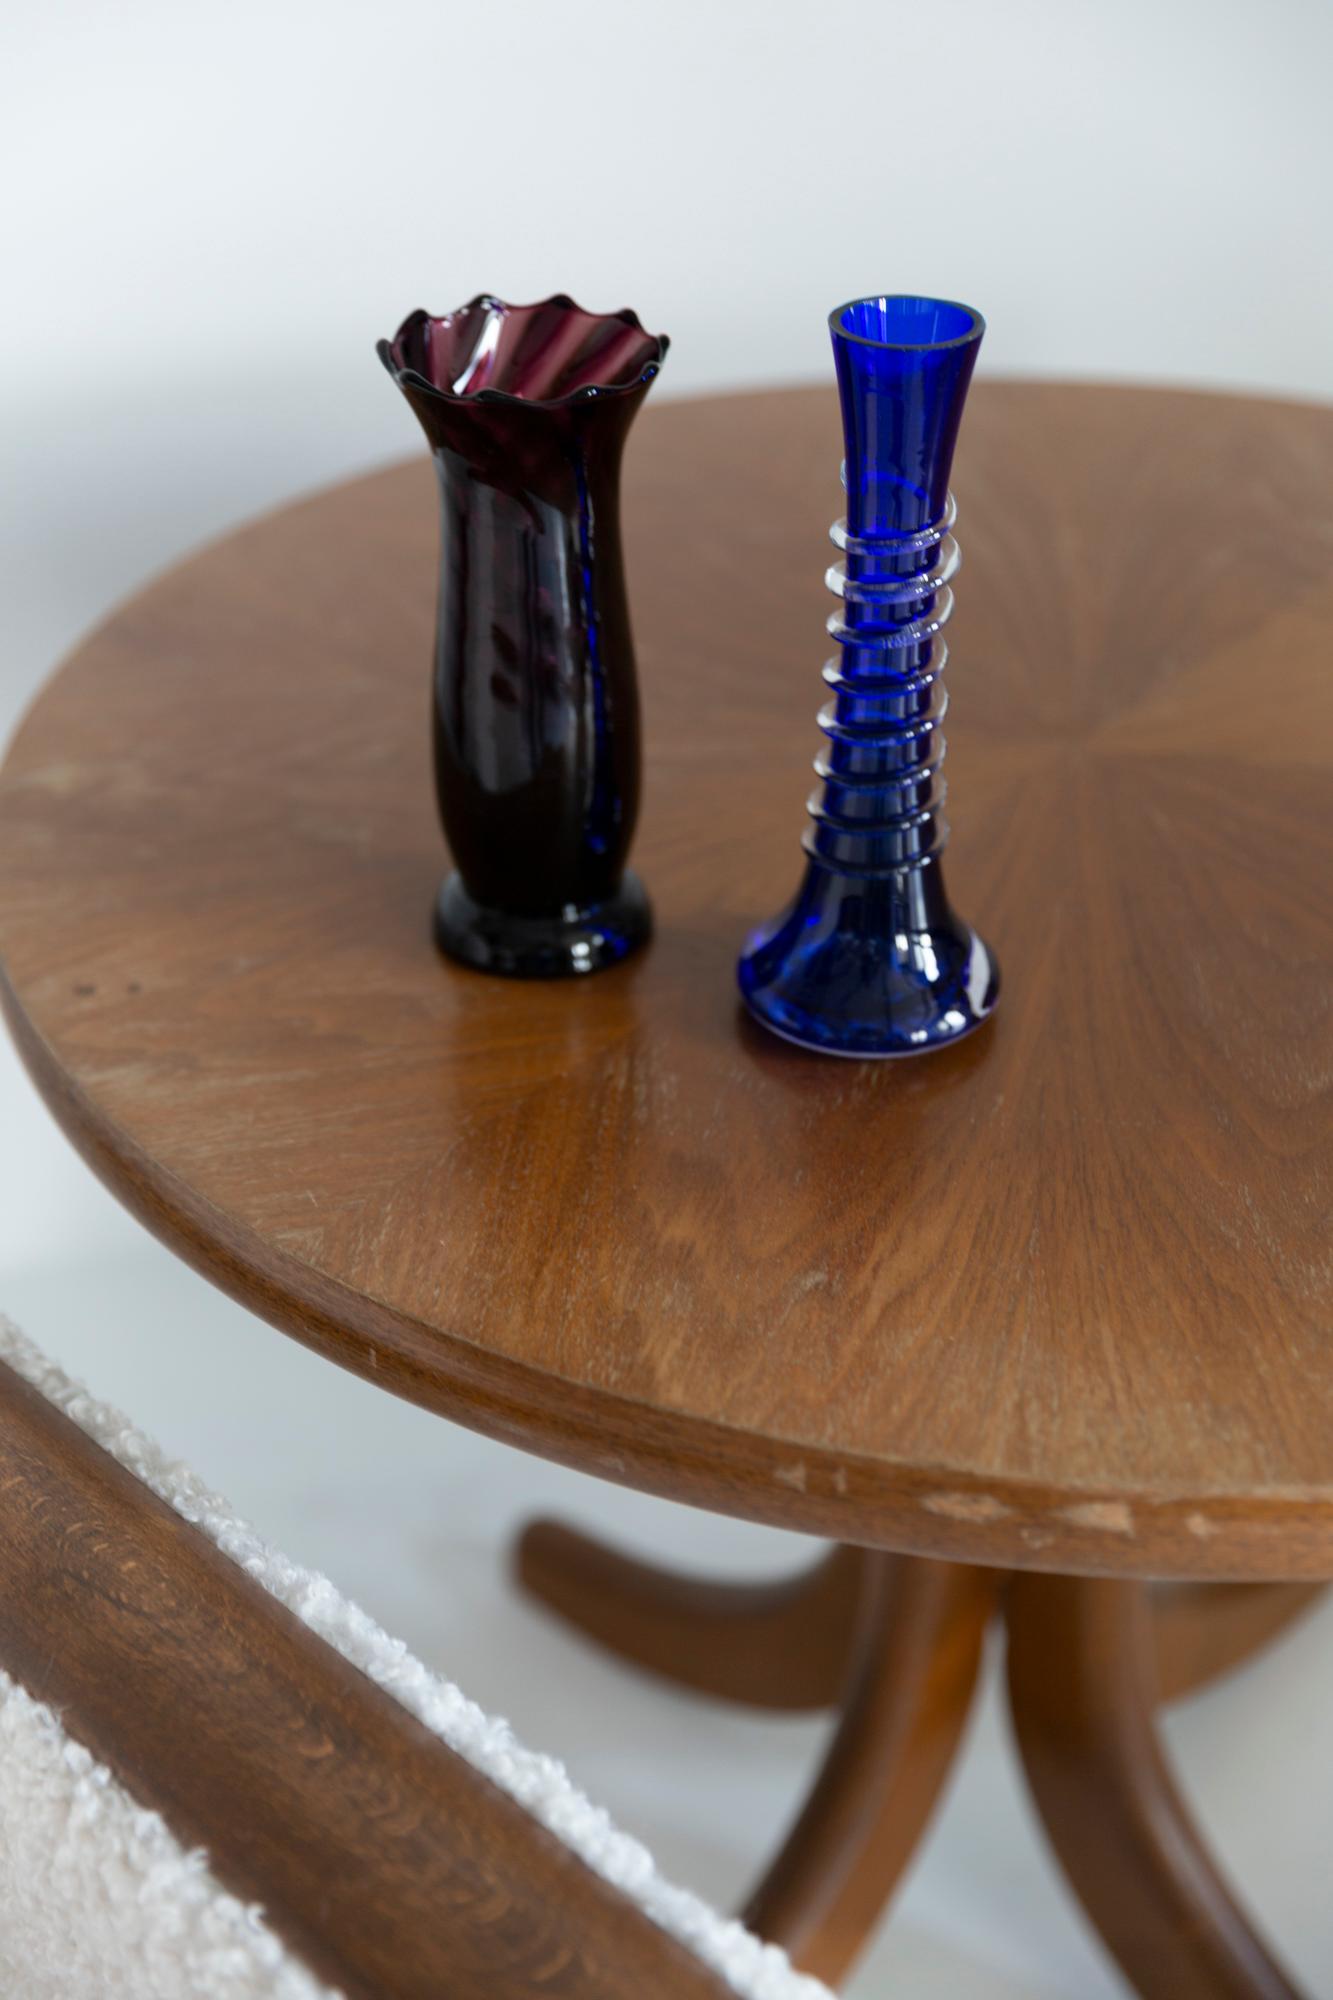 Deep red burgundy vase in amazing organic shape. Produced in 1960s.
Glass in perfect condition. The vase looks like it has just been taken out of the box.

No jags, defects etc. The outer relief surface, the inner smooth. Thick glass vase,